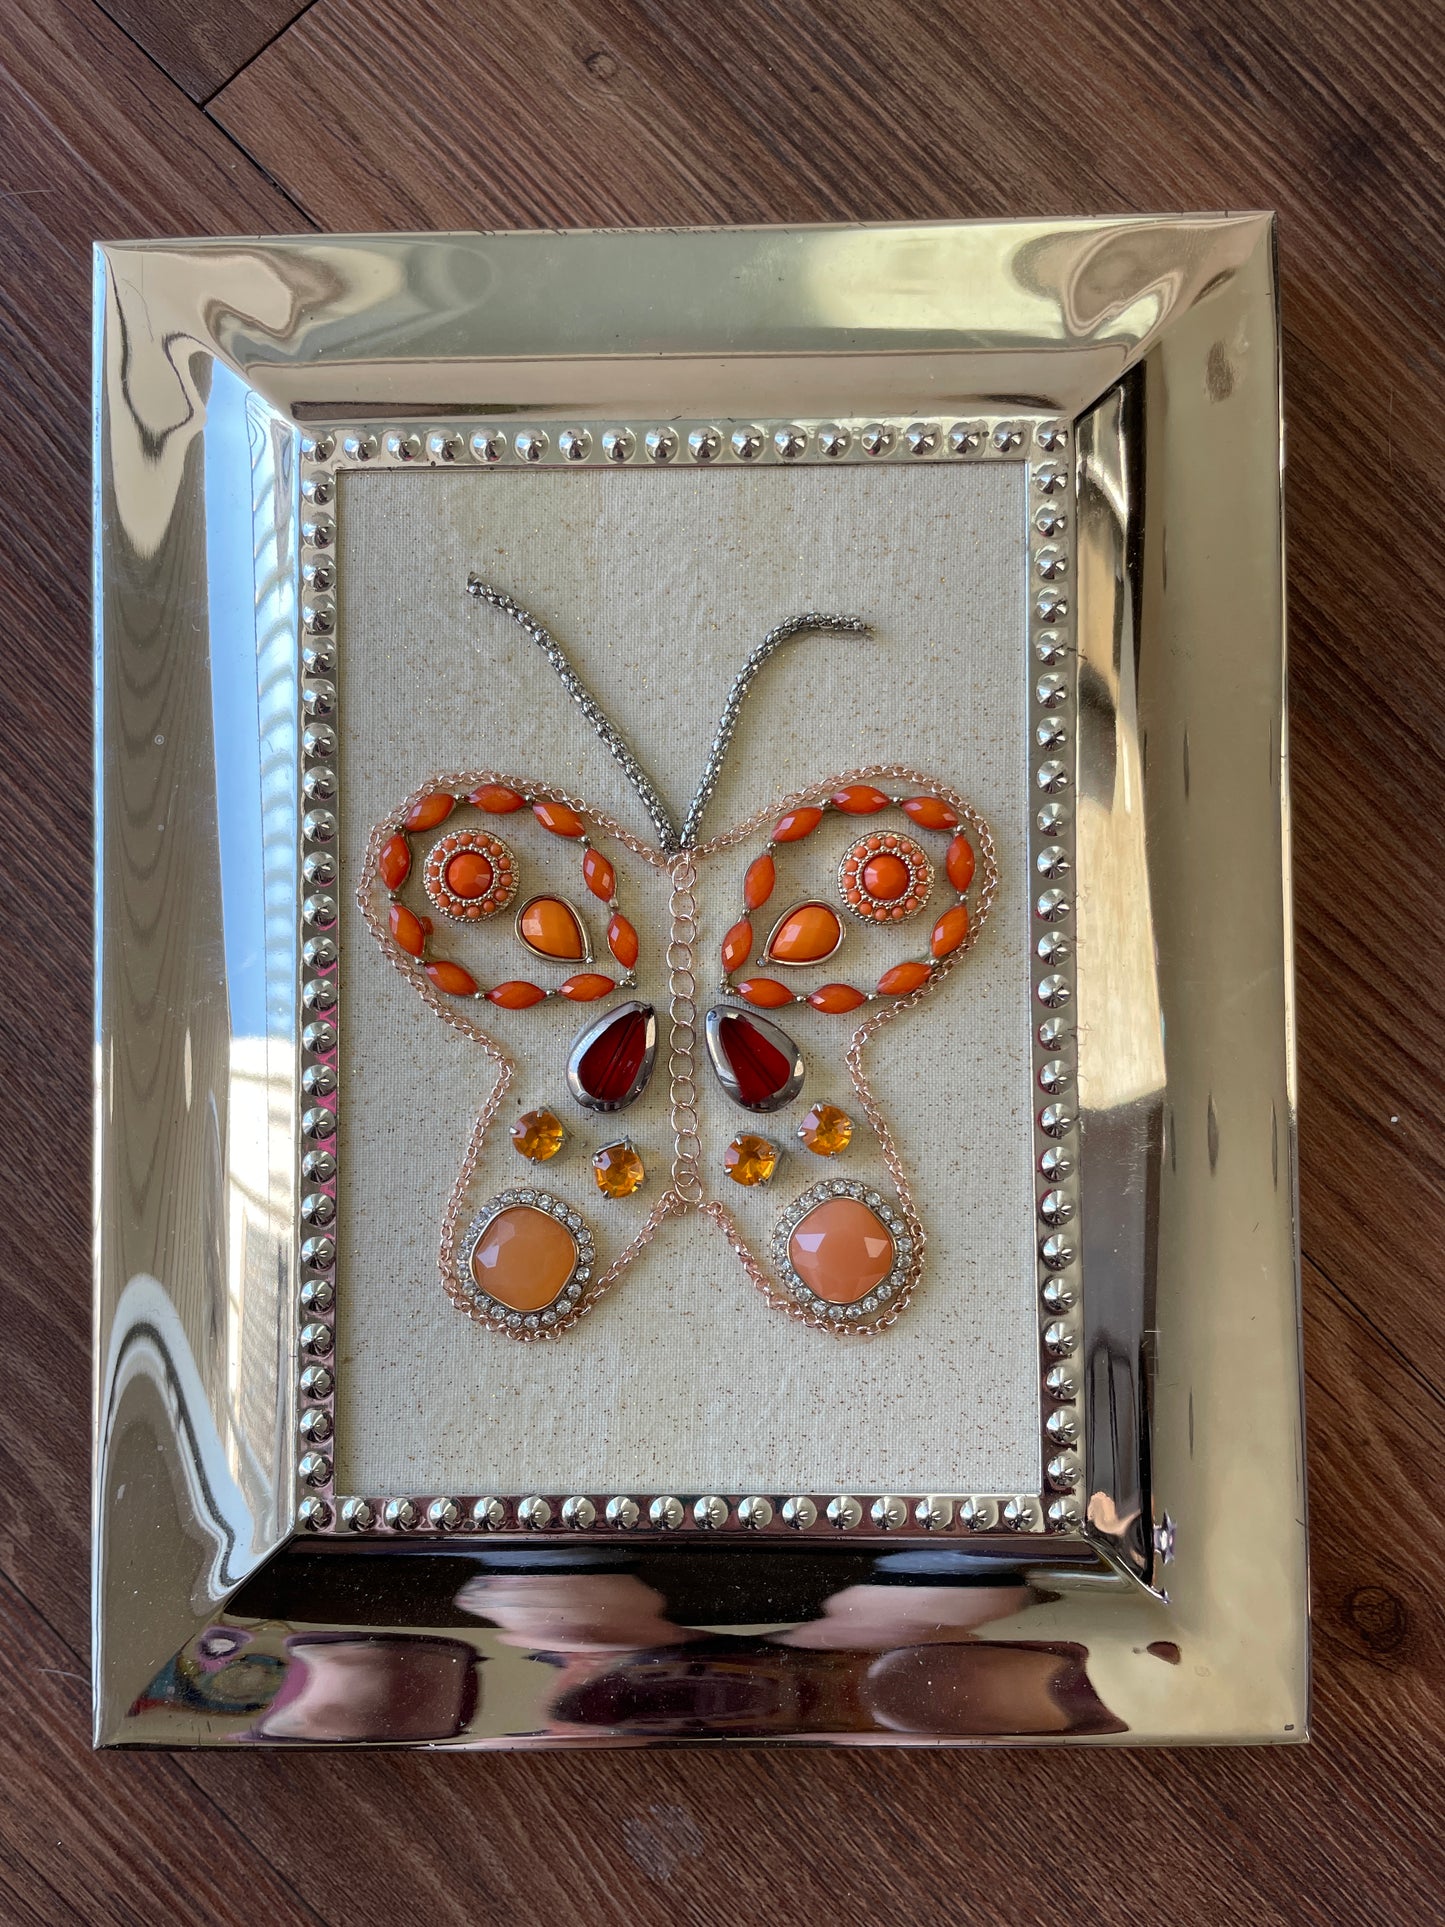 Gold, White, and Pink Framed Jewelry Butterfly Handmade with Over 20 Pieces of Vintage & Upcycled Jewelry